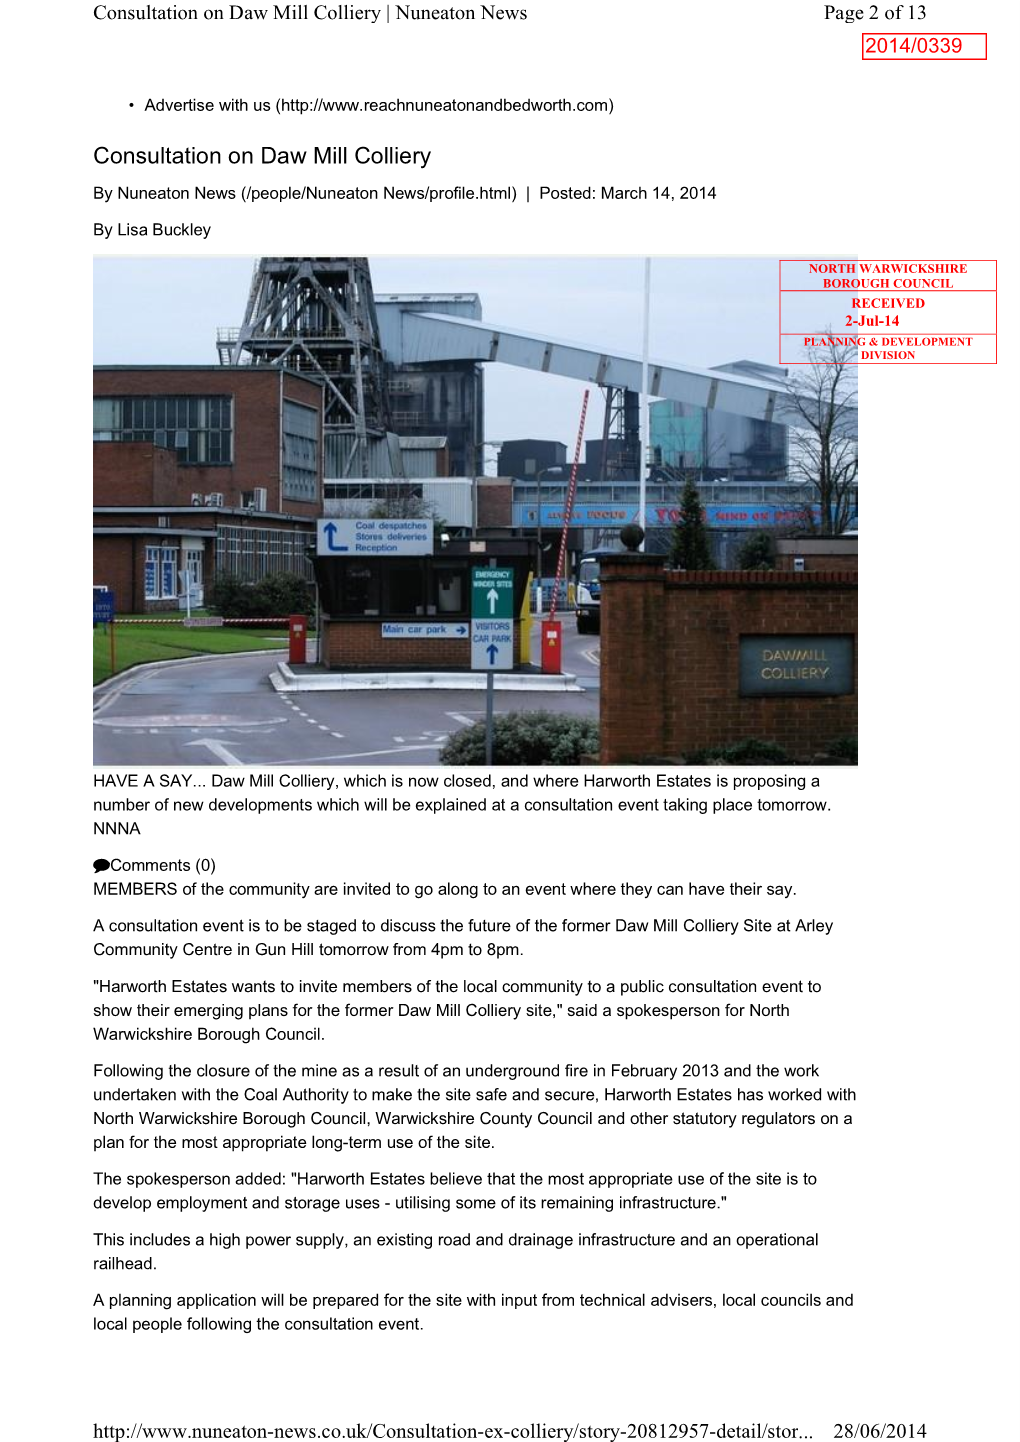 Consultation on Daw Mill Colliery | Nuneaton News Page 2 of 13